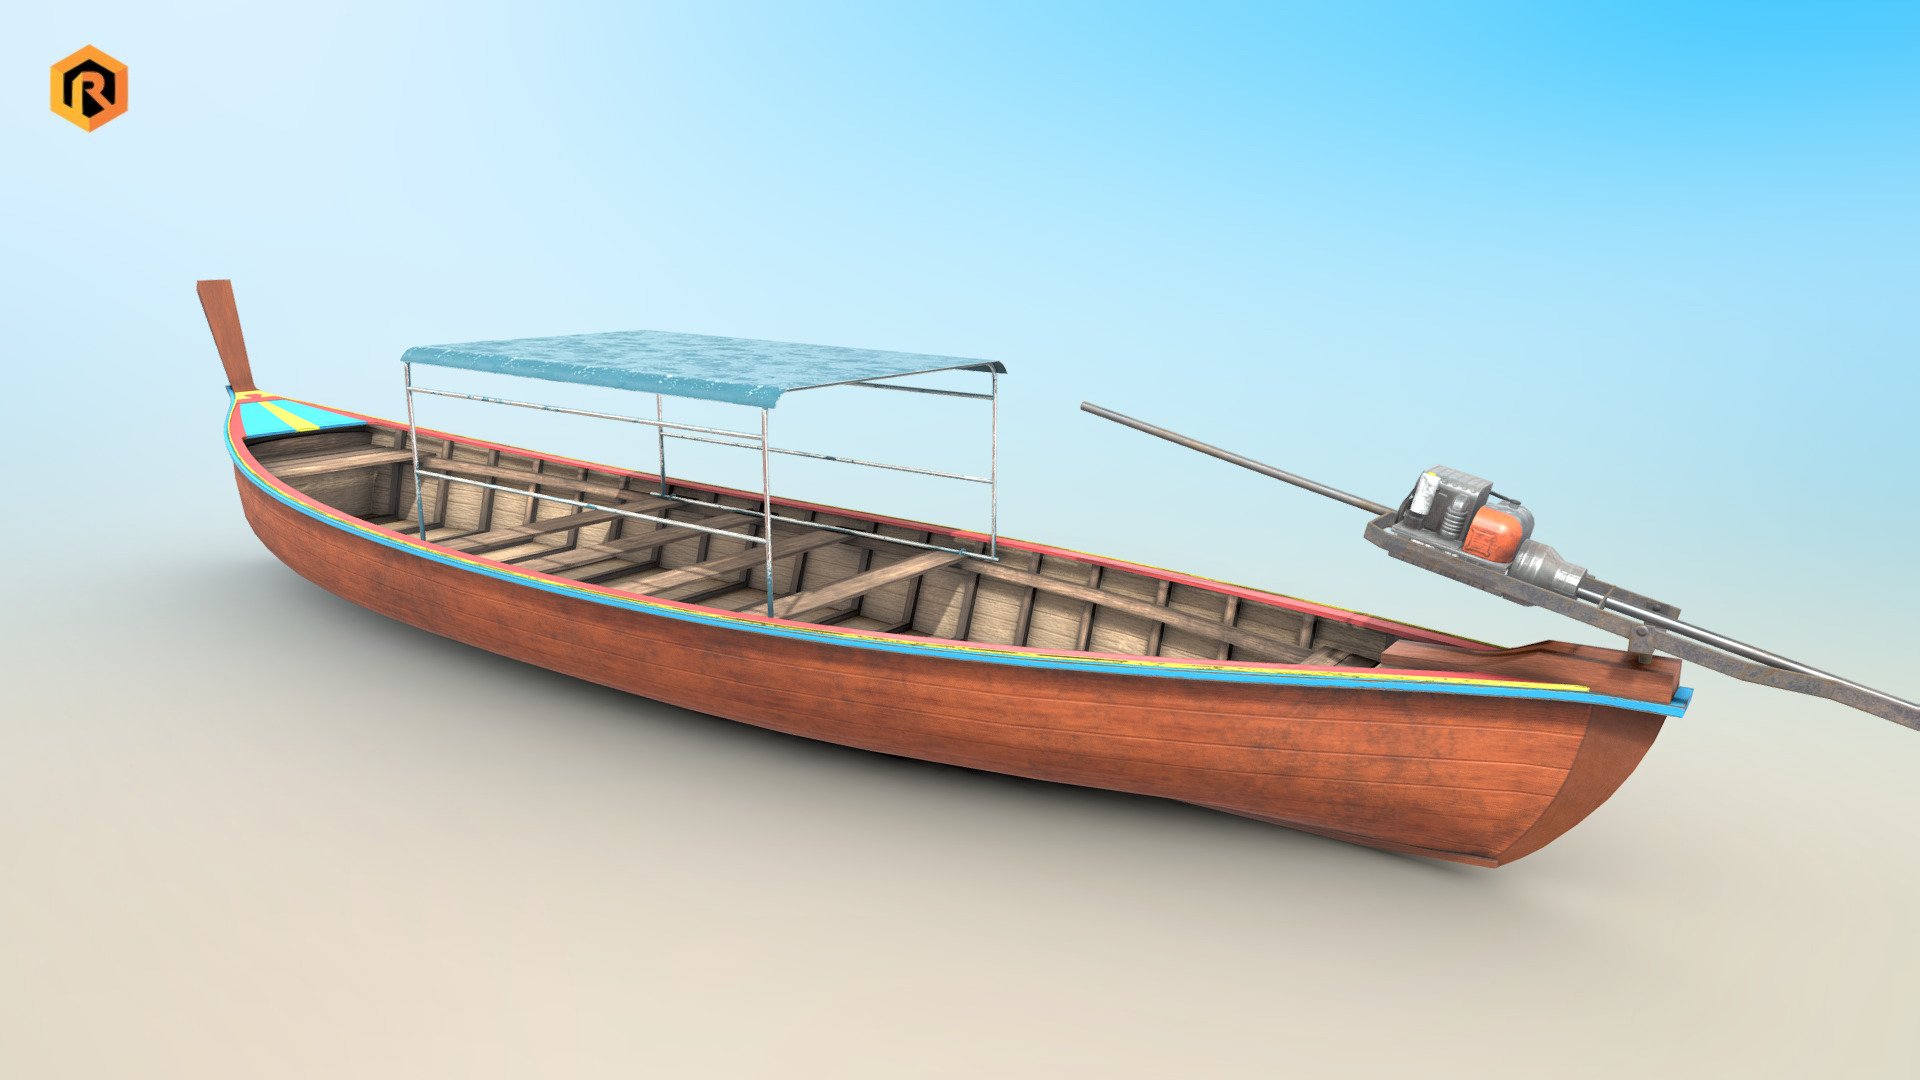 High-quality 3D low-poly PBR 3D model of Long-tail Boat.

This object is best for use in games and other real-time applications such as Unity or Unreal Engine.  It can also be rendered in Blender (ex Cycles) or Vray as the model is equipped with all required textures. We have made every effort to ensure that the model and textures are as detailed as possible and made with the greatest care.  

Technical details:  




3 PBR textures sets (Body, Engine, Roof) 

4949 Triangles

5582  Vertices

The model is divided into few 5 objects (Main Body, Roof, Engine Root, Engine Arm, Propeller)

Pivot points are correctly placed

Model scaled to approximate real world size  

All nodes, materials and textures are appropriately named

Lot of additional file formats included (Blender, Unity, UE4,  etc.)

More file formats are available in additional zip file on product page !  

Please feel free to contact me if you have any questions or need any support for this asset 3d model